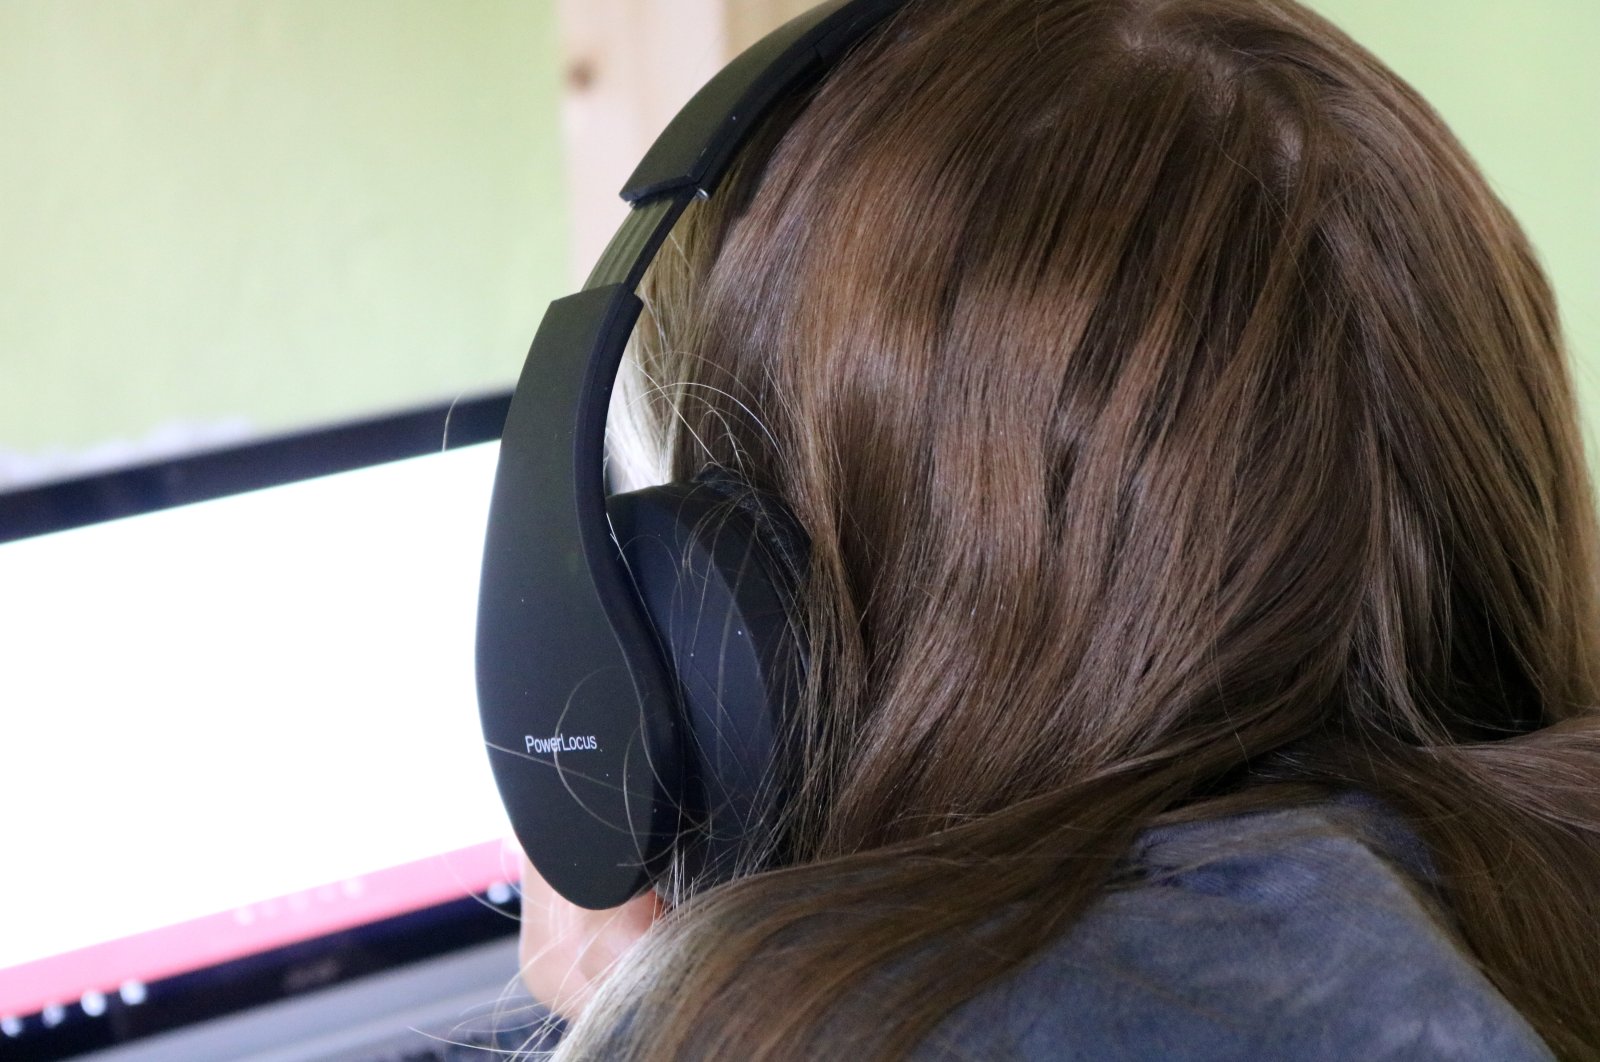 As many as 1 billion young people may be at risk of hearing loss from being exposed to loud noises when listening to music on devices and in other settings, researchers say. (dpa Photo)